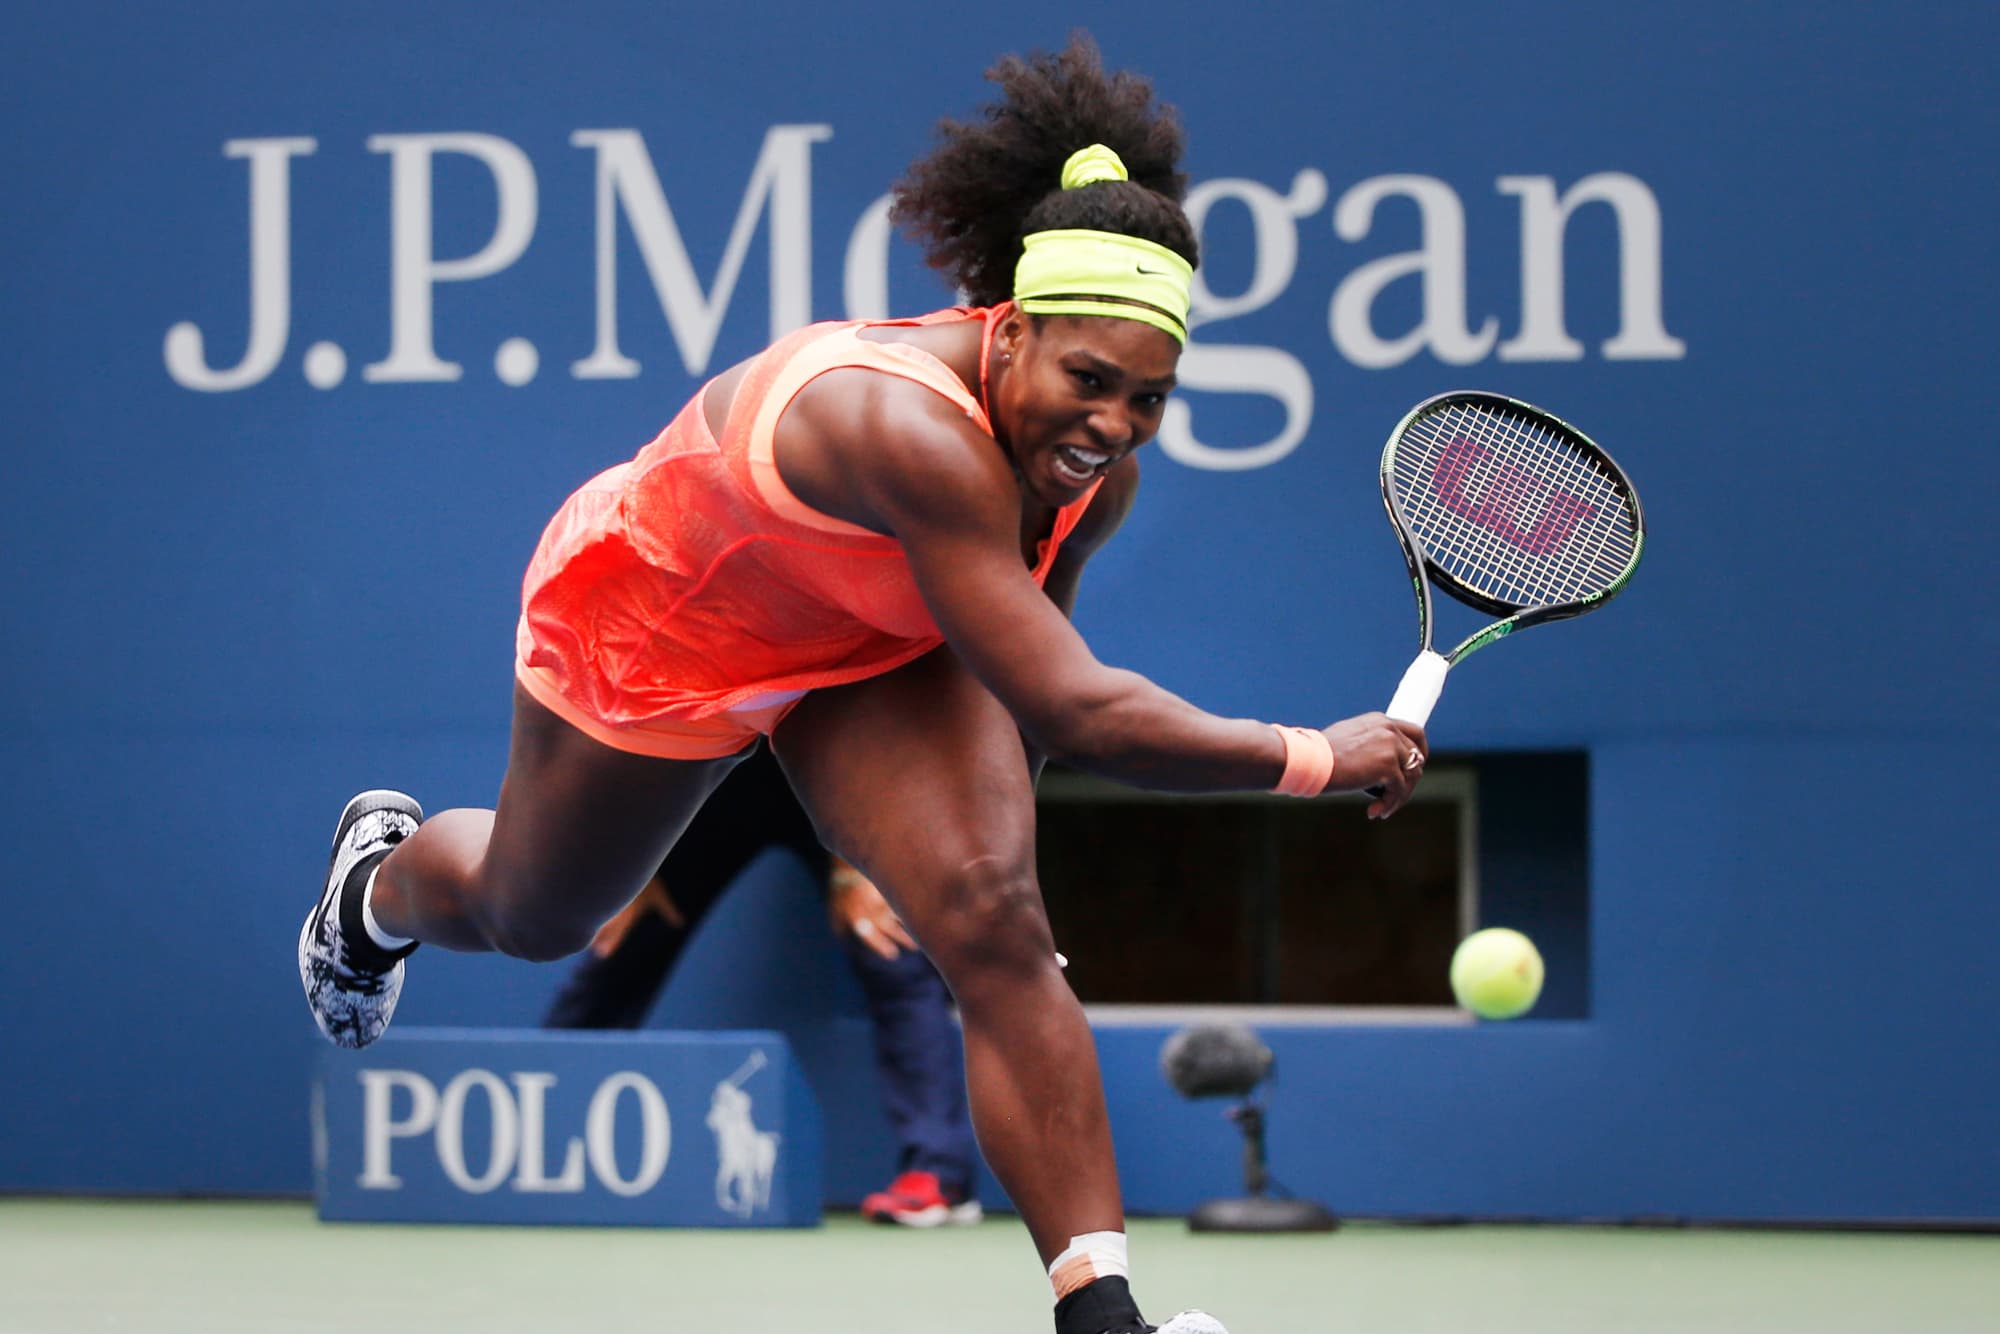 What Reddit co-founder Alexis Ohanion learned from Serena Williams